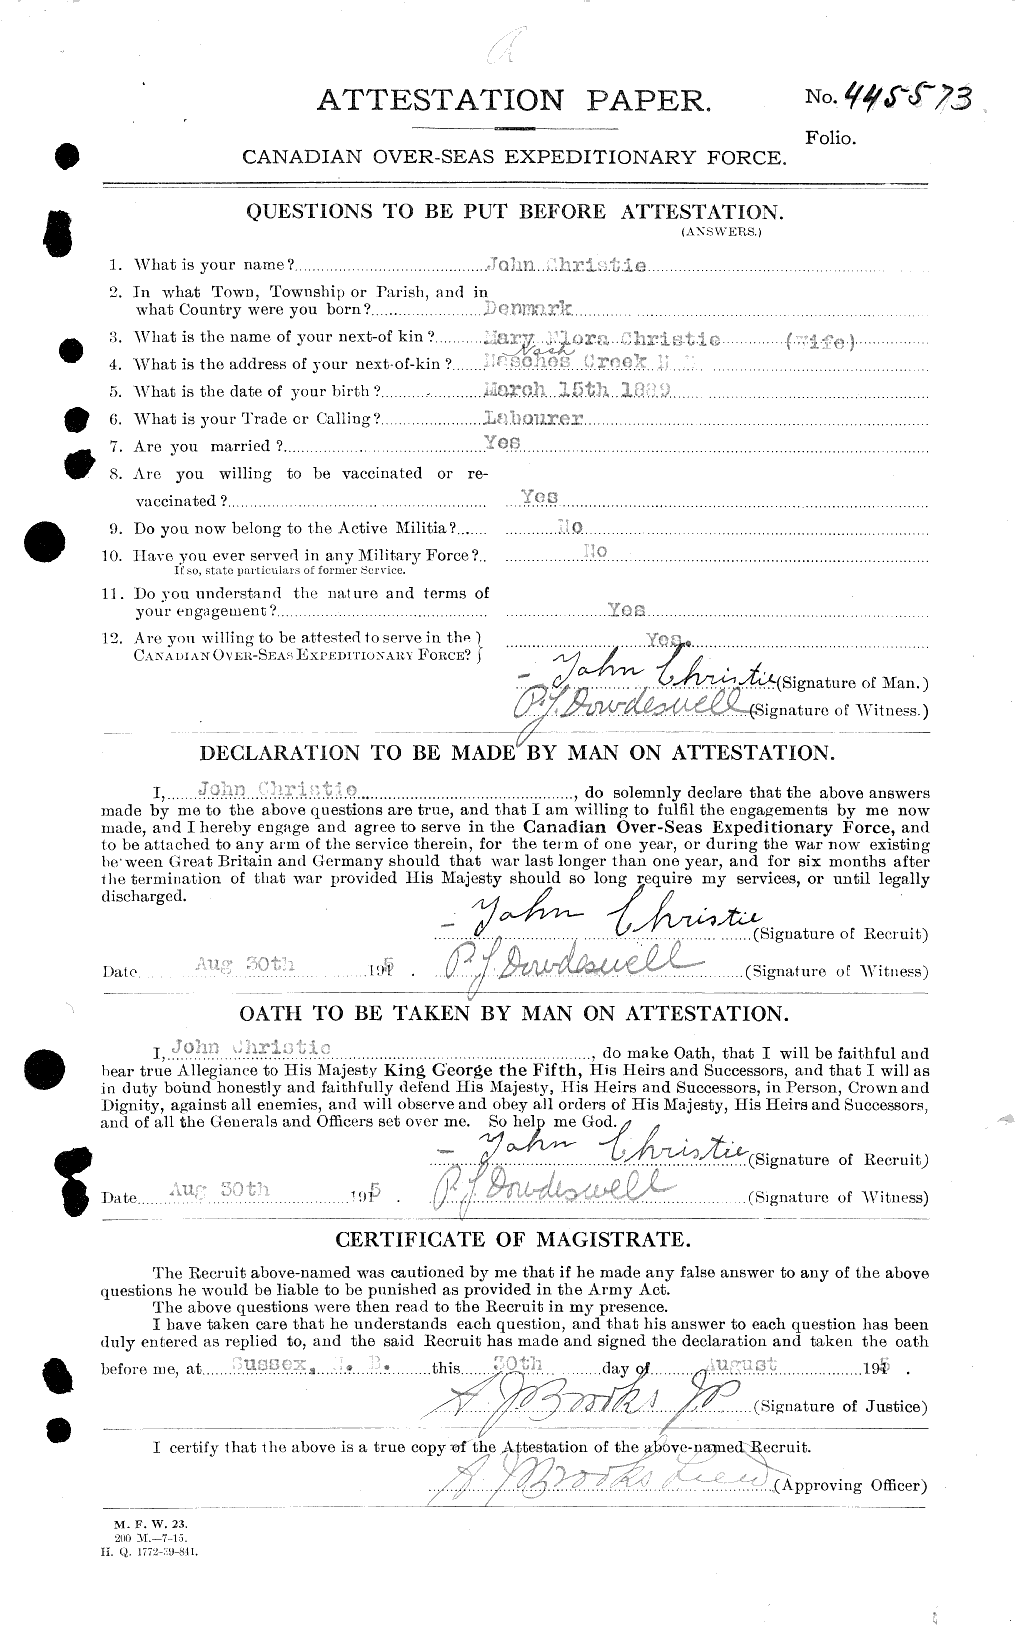 Personnel Records of the First World War - CEF 021994a